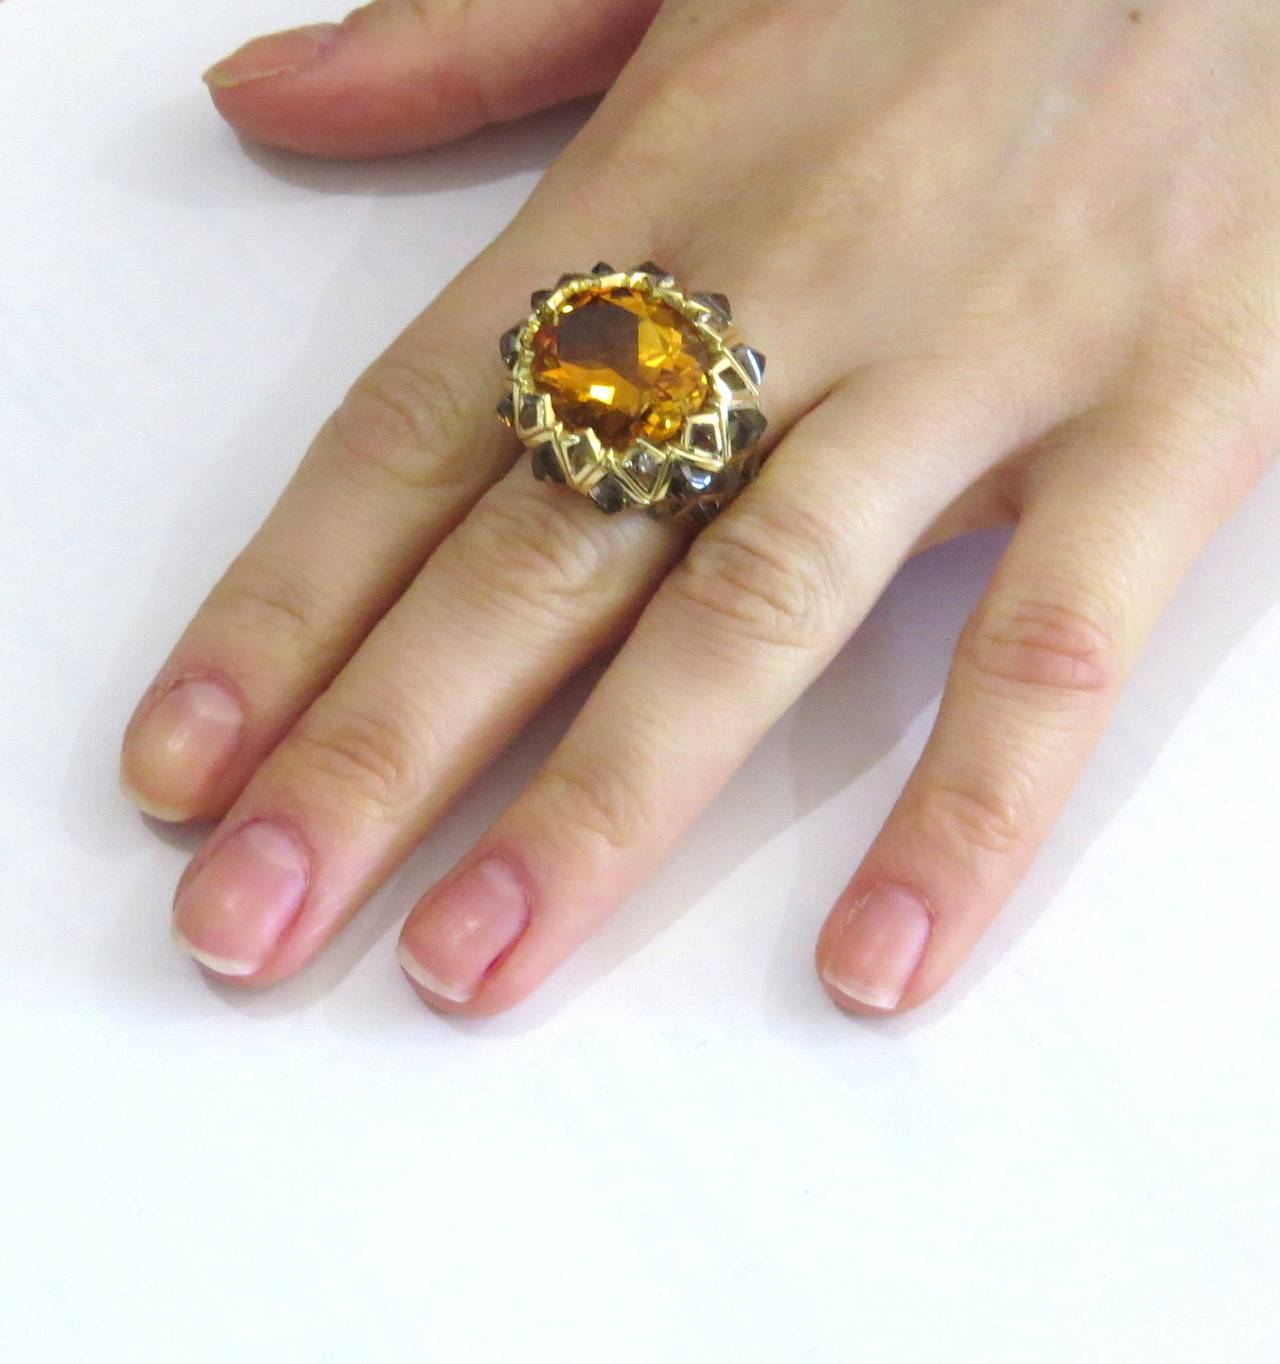 Large and impressive limited edition 70 of 222 made. This 18k gold ring crafted by Stephen Webster, featuring 29.3m x 15.5mm citrine, surrounded with spiked quartz stones. Ring is a size 7 and top measures 25mm x 29mm and sits approximately 10mm